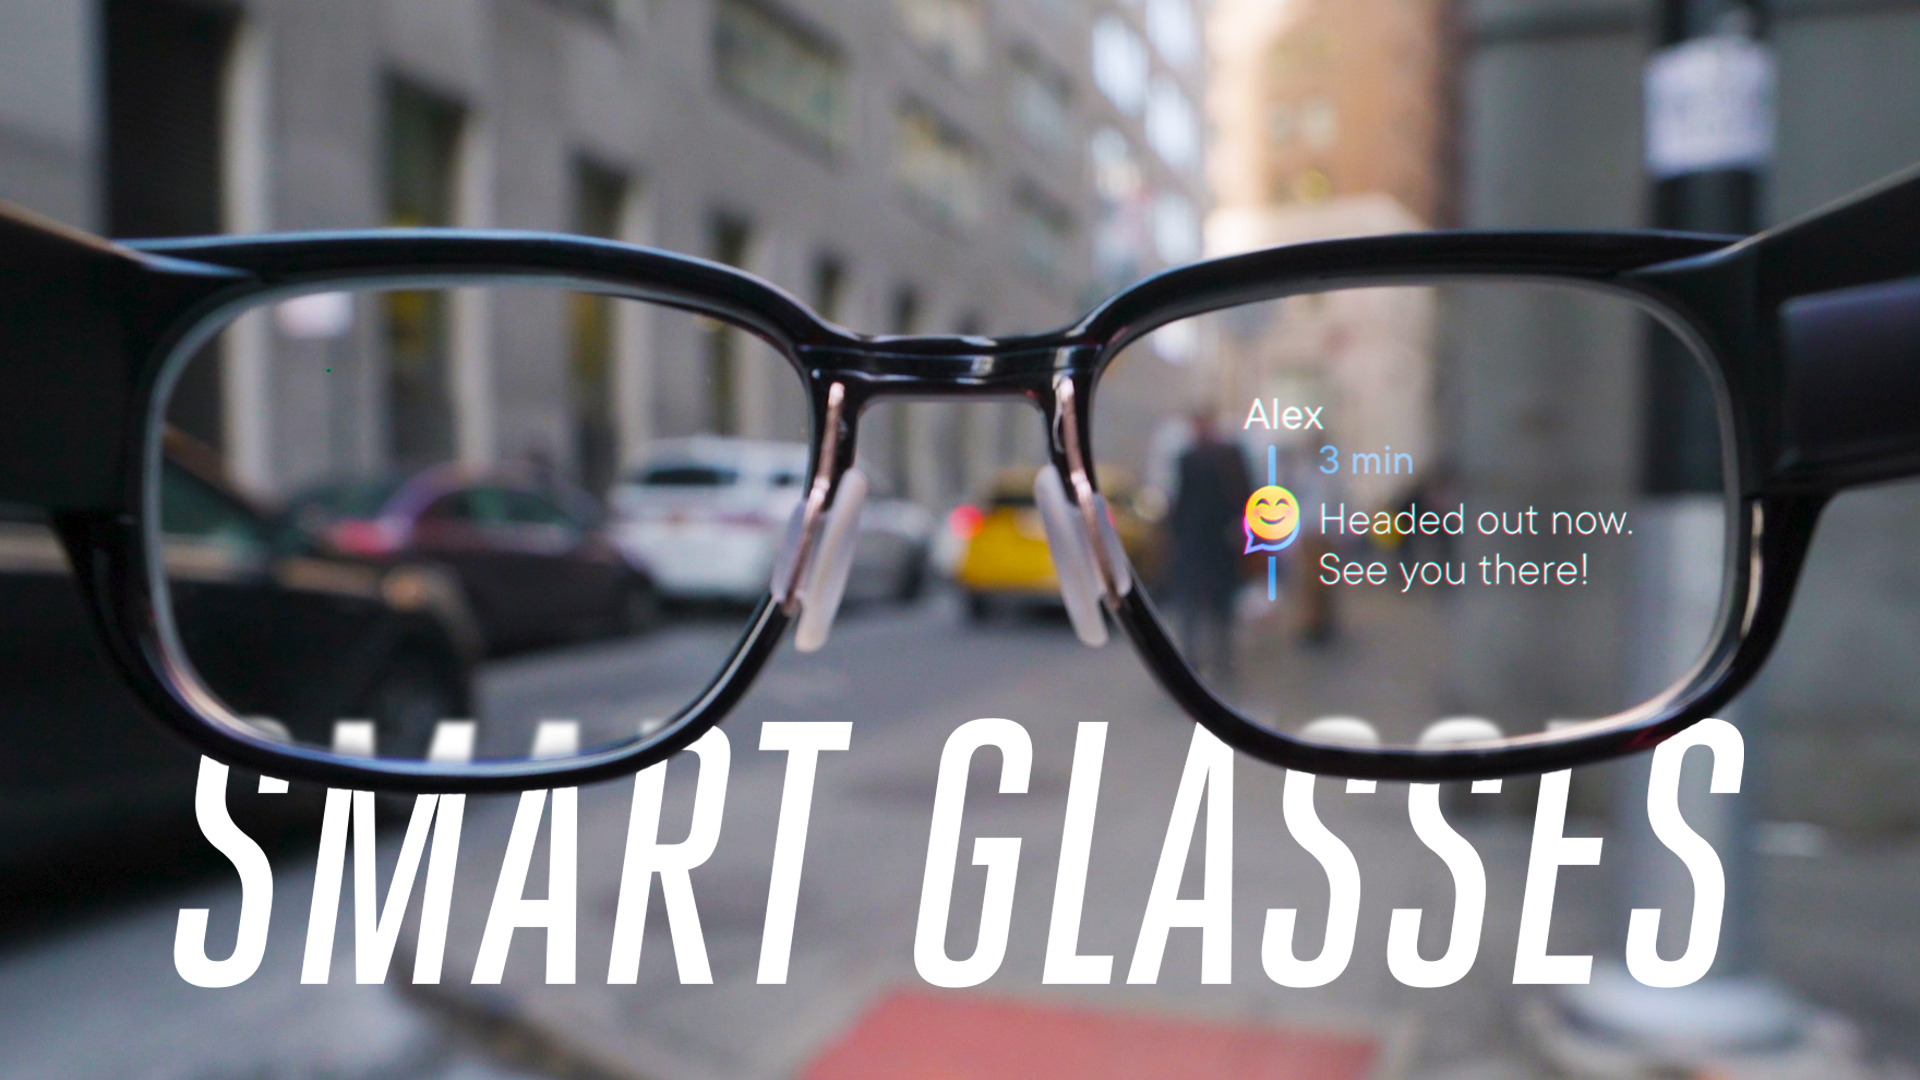 REVIEW: LED Glasses - App Controlled, Bluetooth LED Display Smart Glasses?  